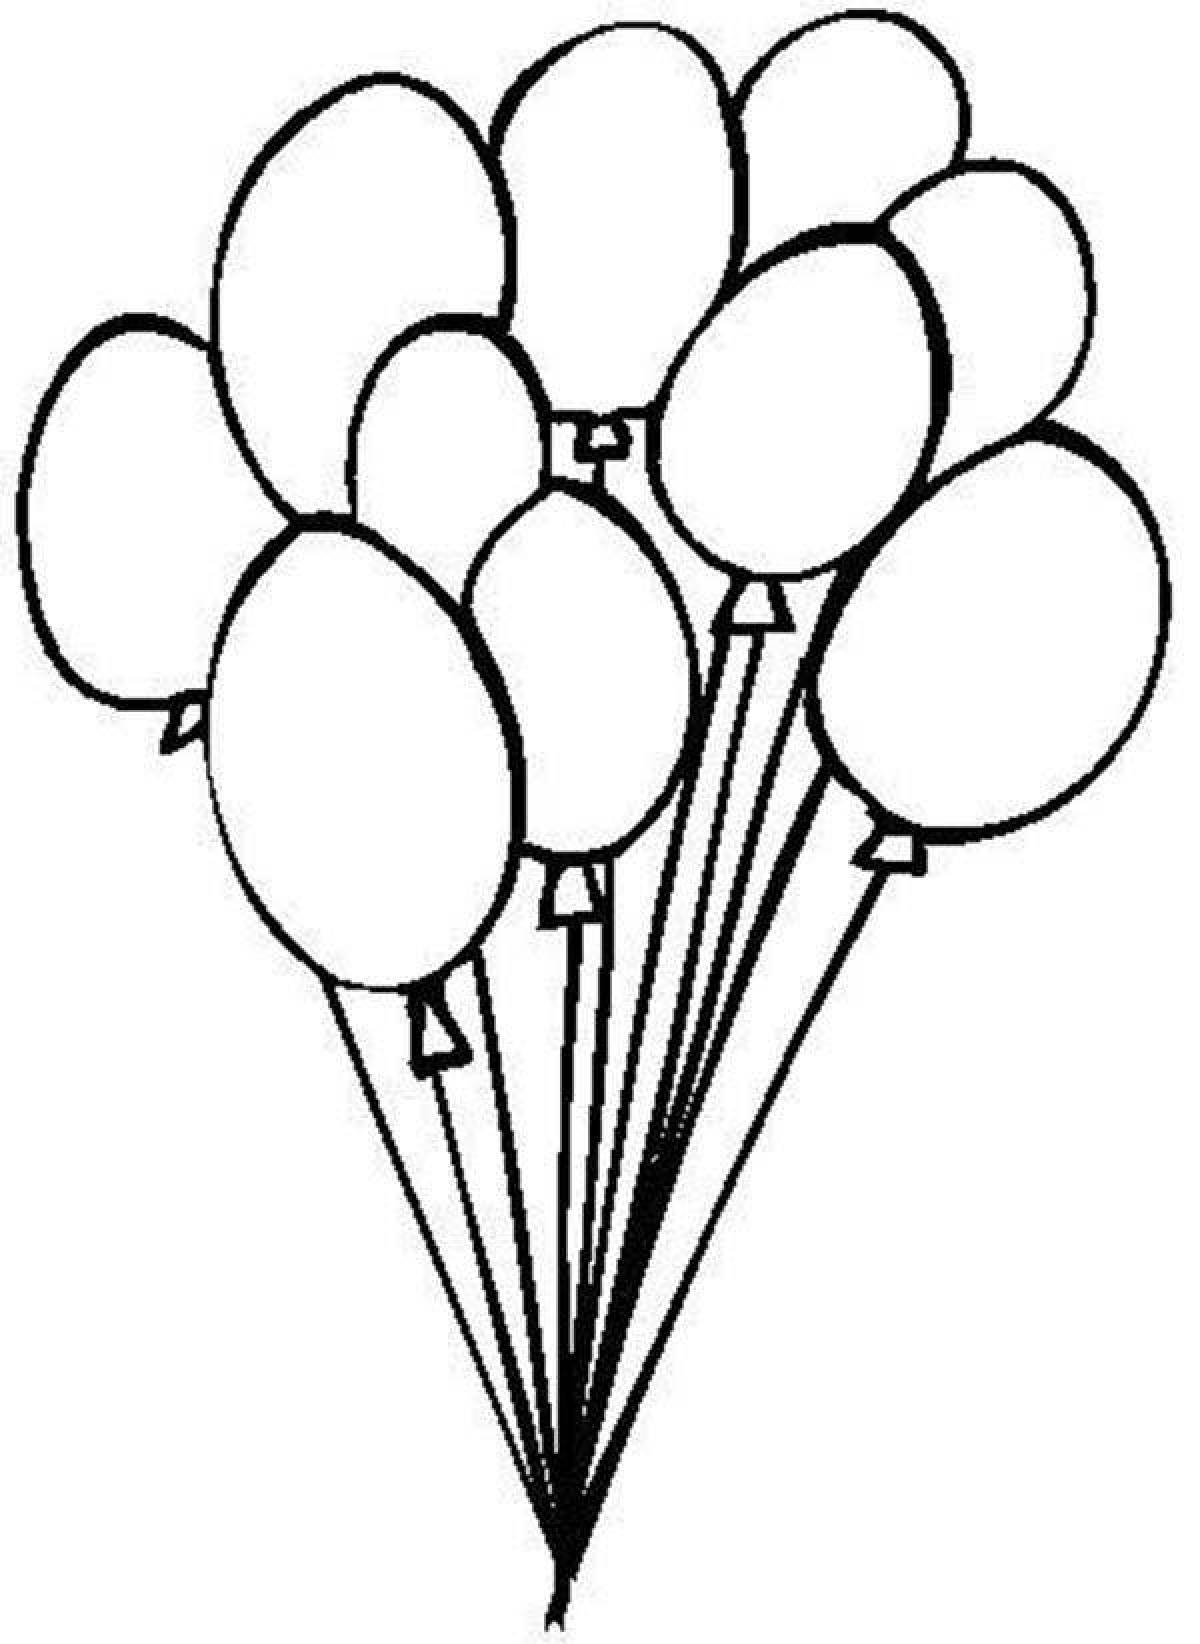 Amazing coloring pages with balloons for kids